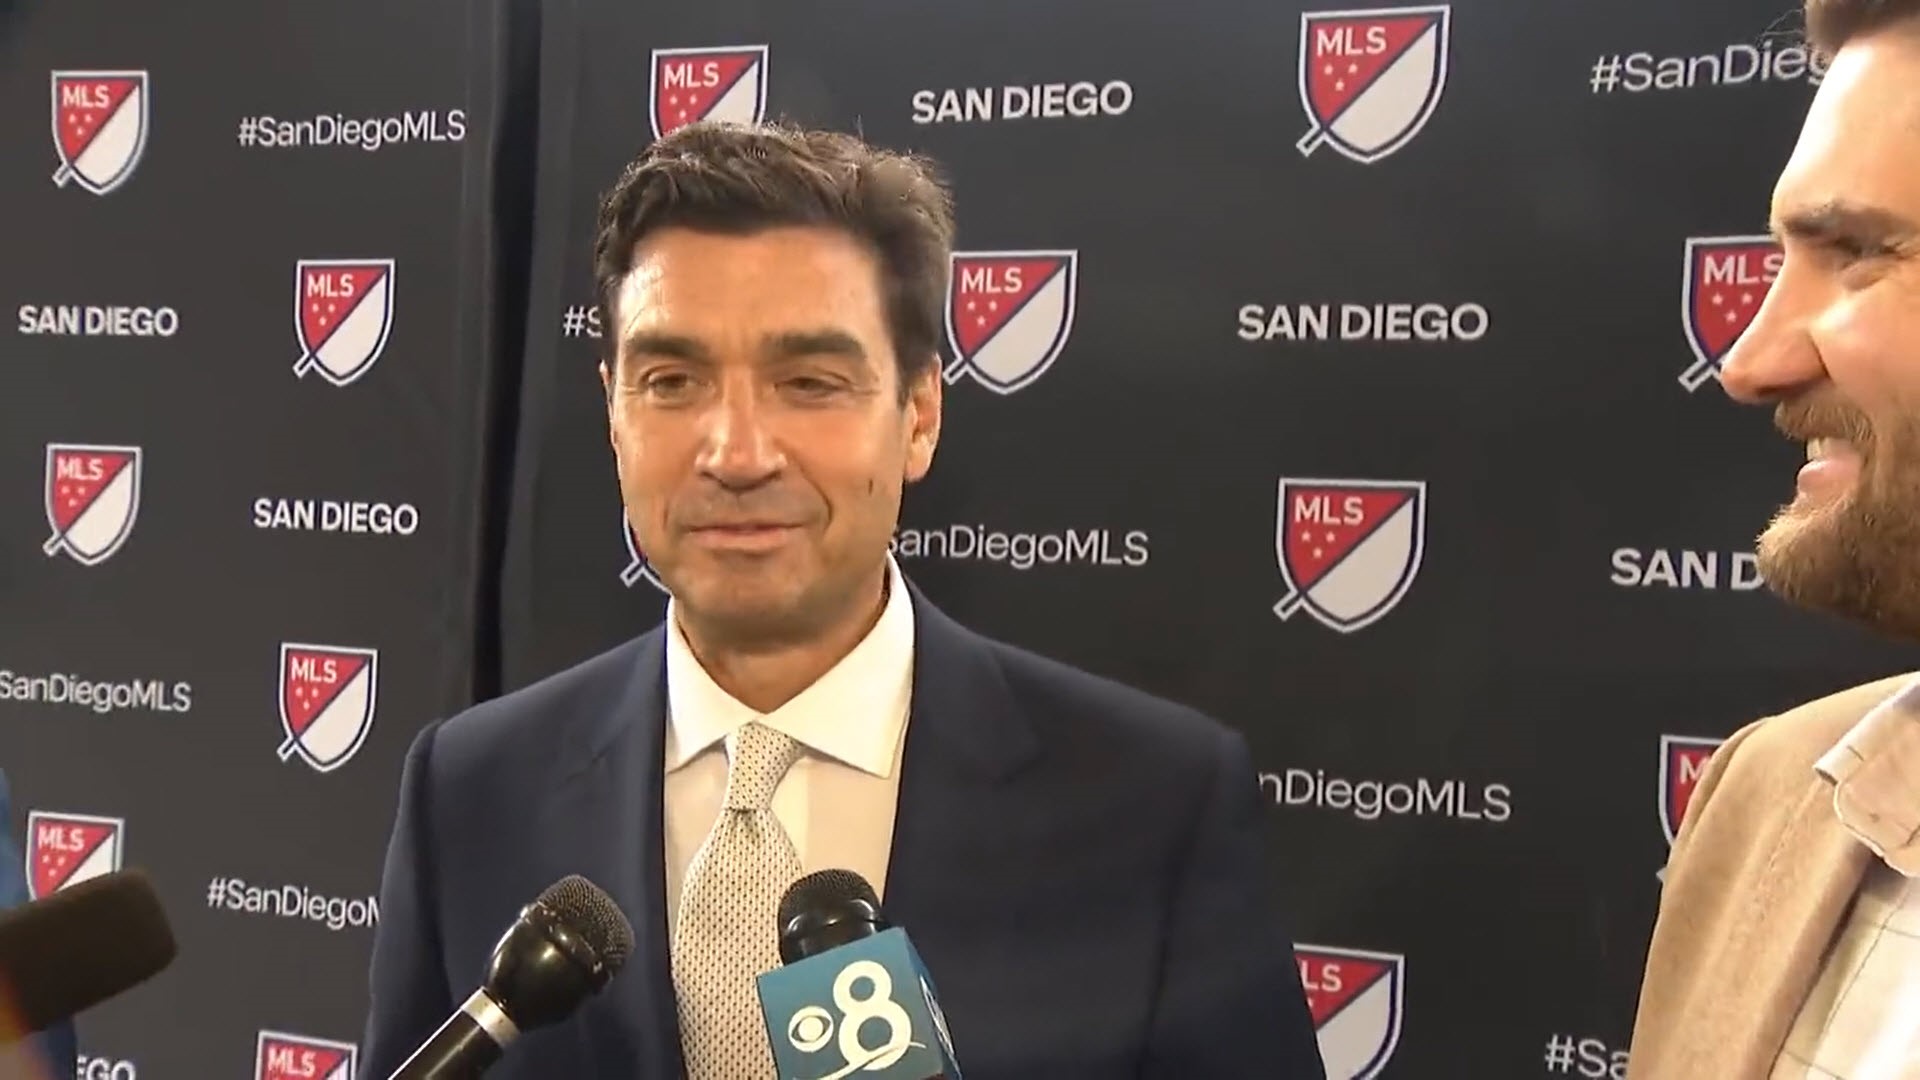 "You heard it here first" In an interview with CBS 8,  team CEO Tom Penn shared the two names the team is deciding between for the newest MLS franchise in San Diego.